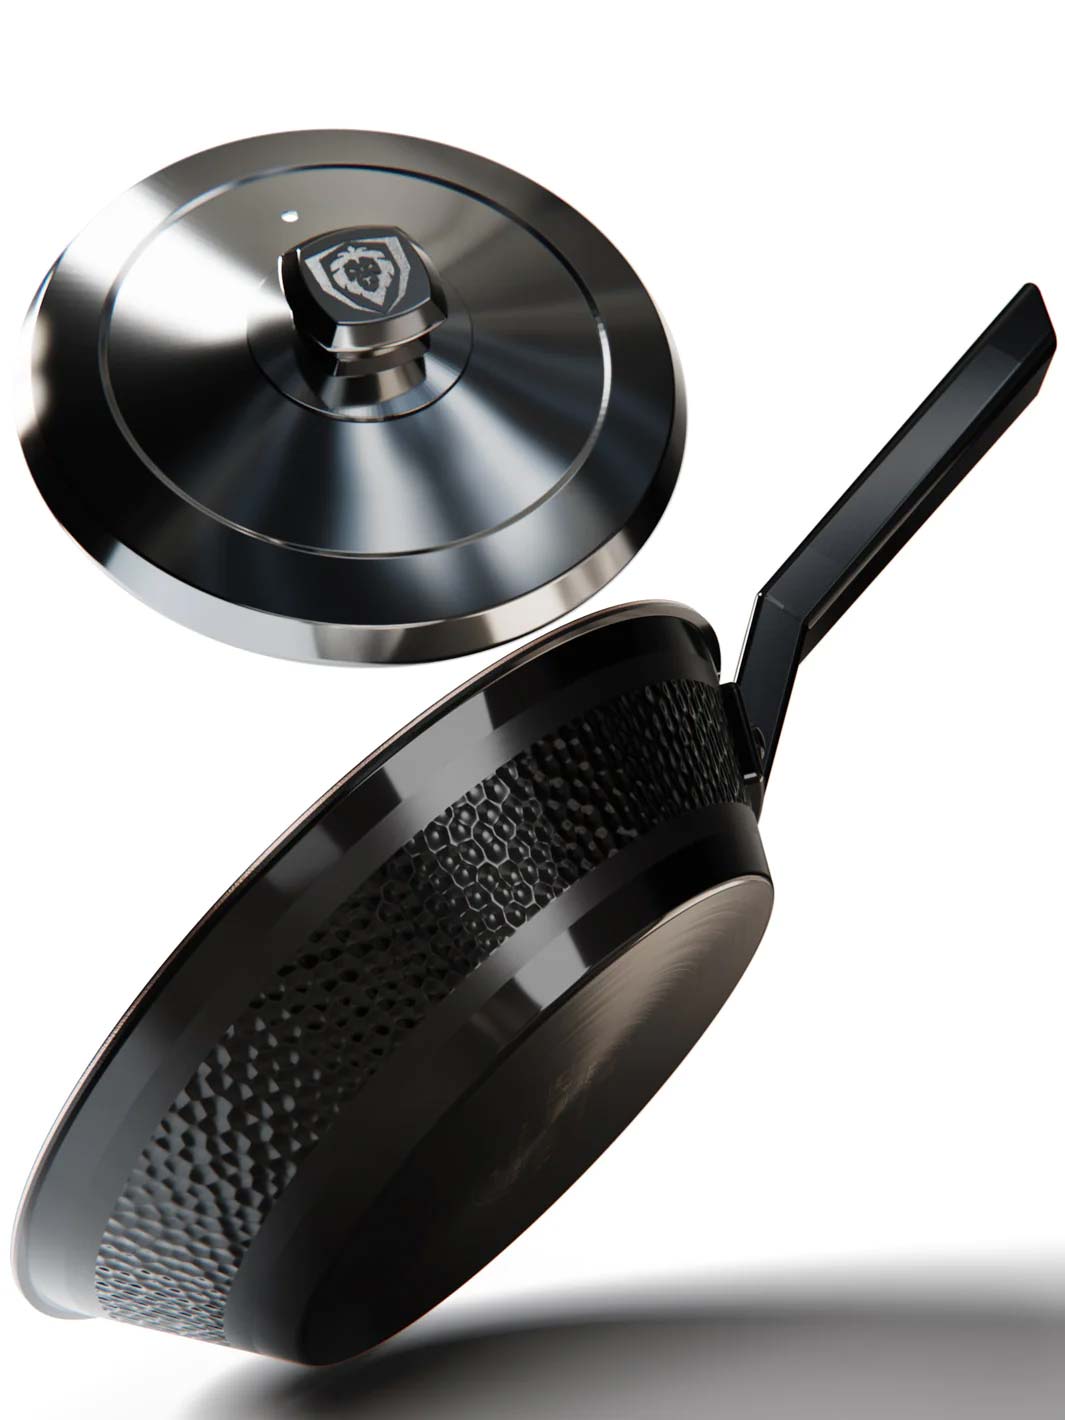 9" Skillet Frying Pan - Hammered Finish - Black - The Avalon Series